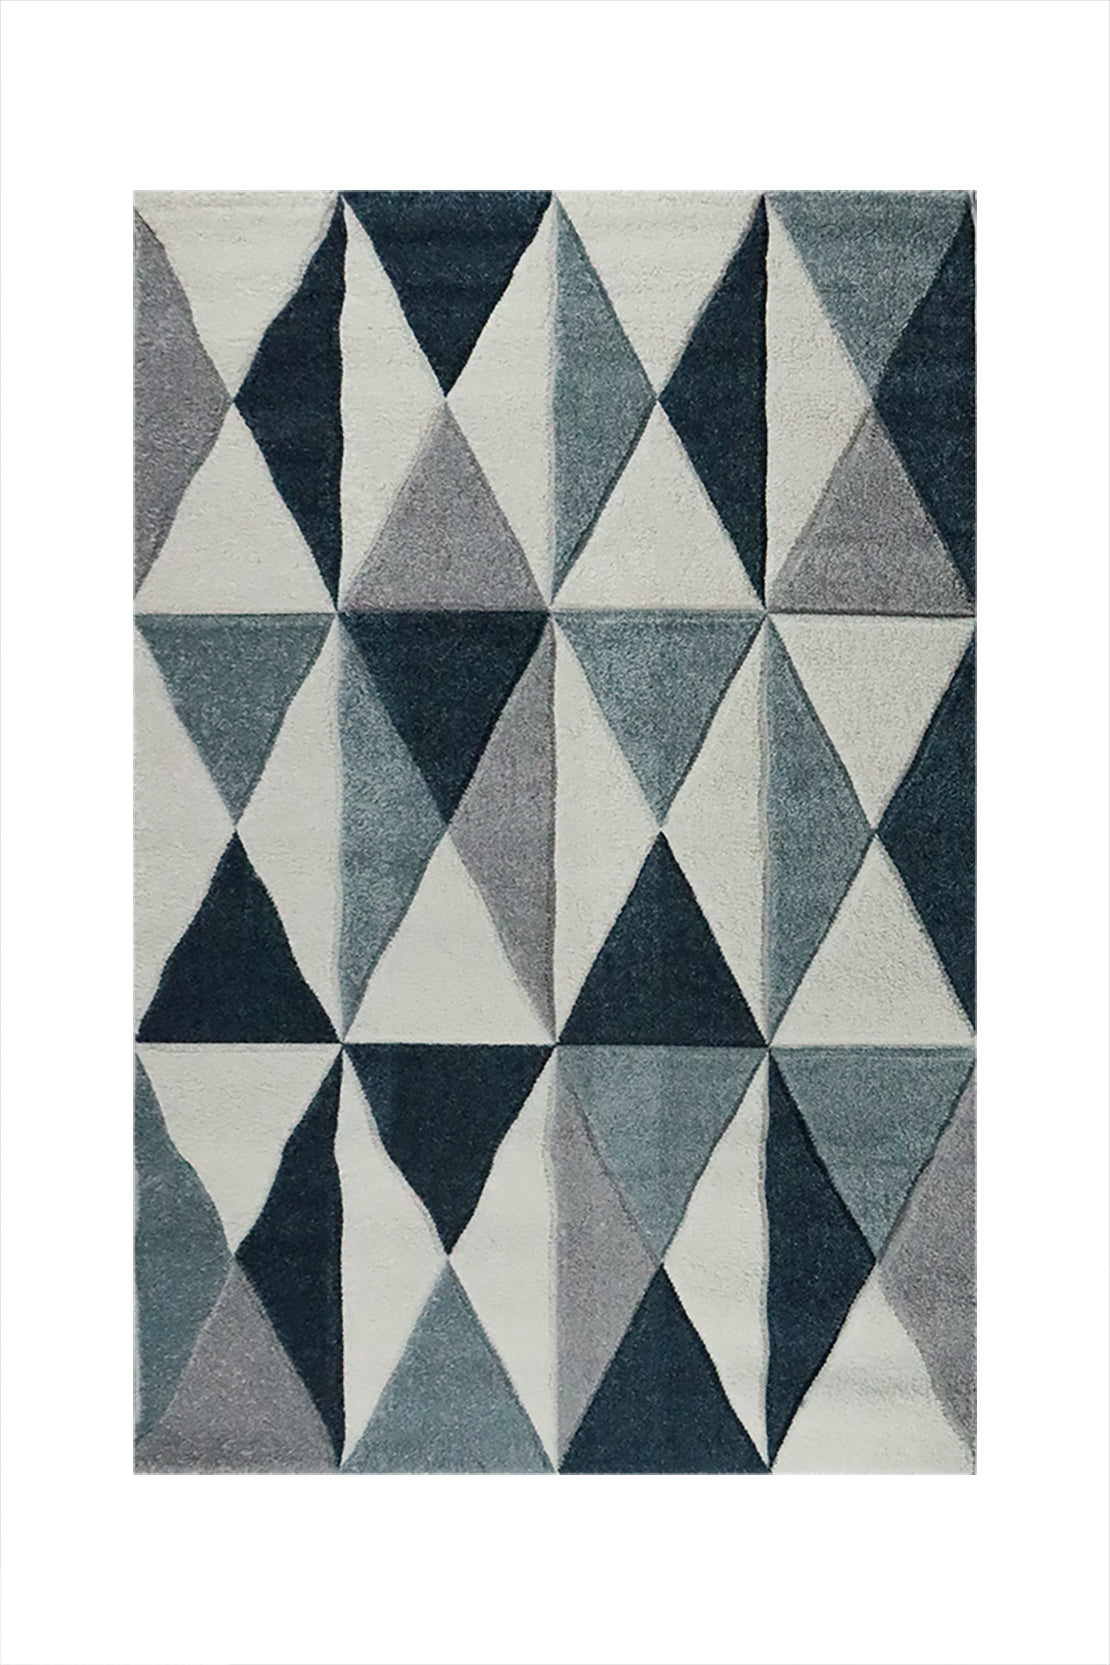 Turkish Modern Festival WD Rug - 3.9 x 5.5 FT - Blue - Sleek and Minimalist for Chic Interiors